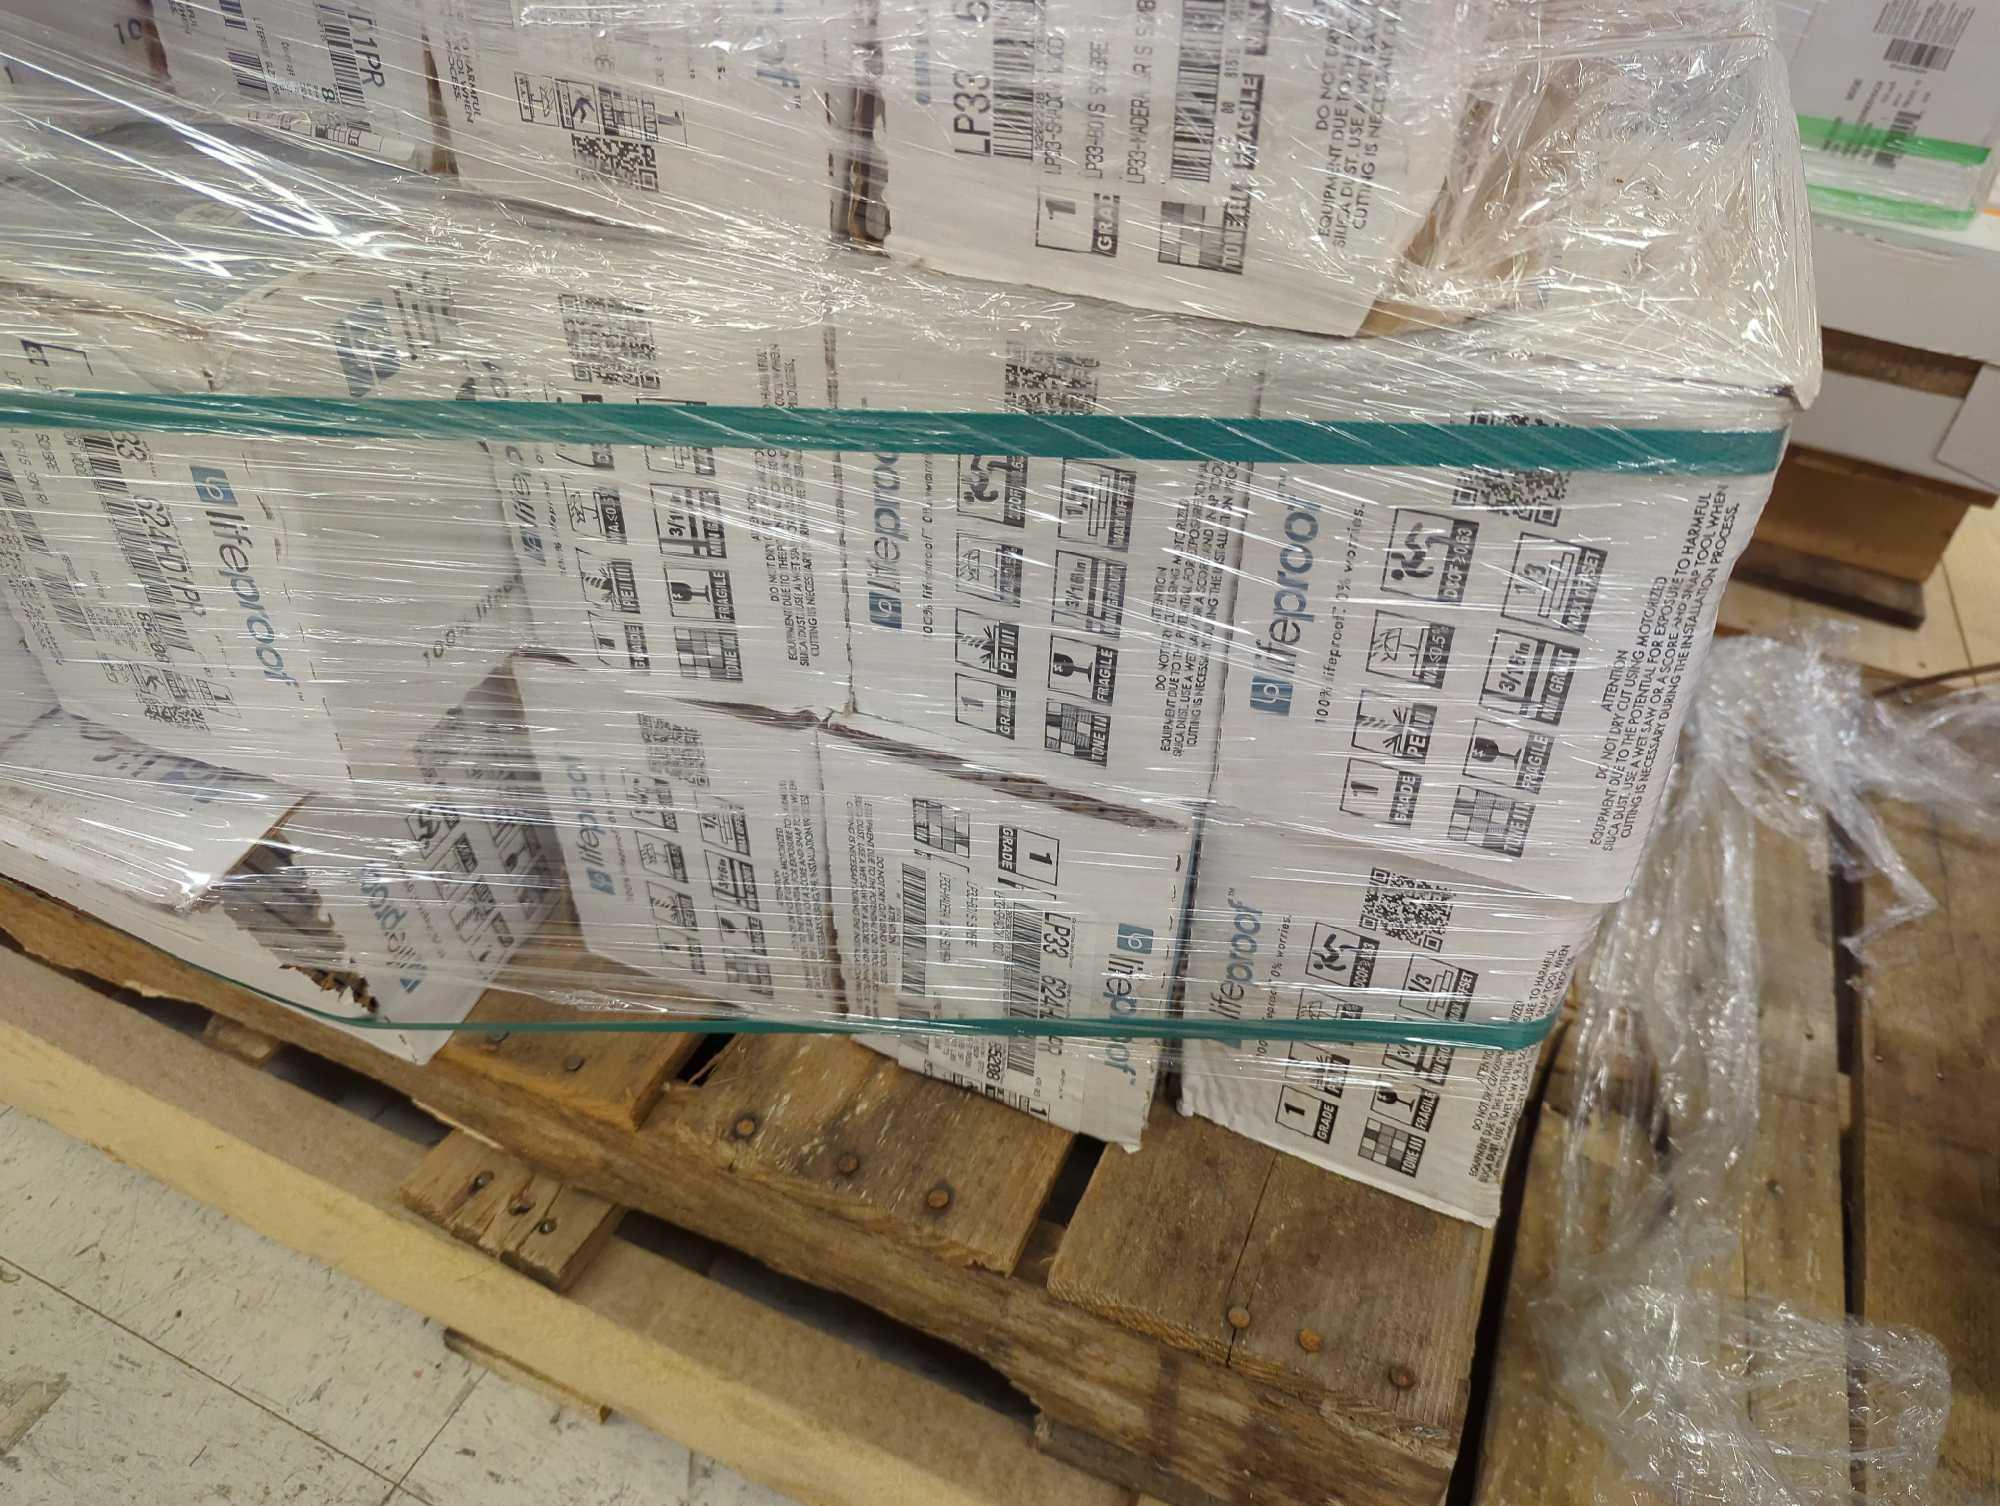 Pallet Lot of Approximately 20 Cases of Lifeproof Shadow Wood 6 in. x 24 in. Porcelain Floor and